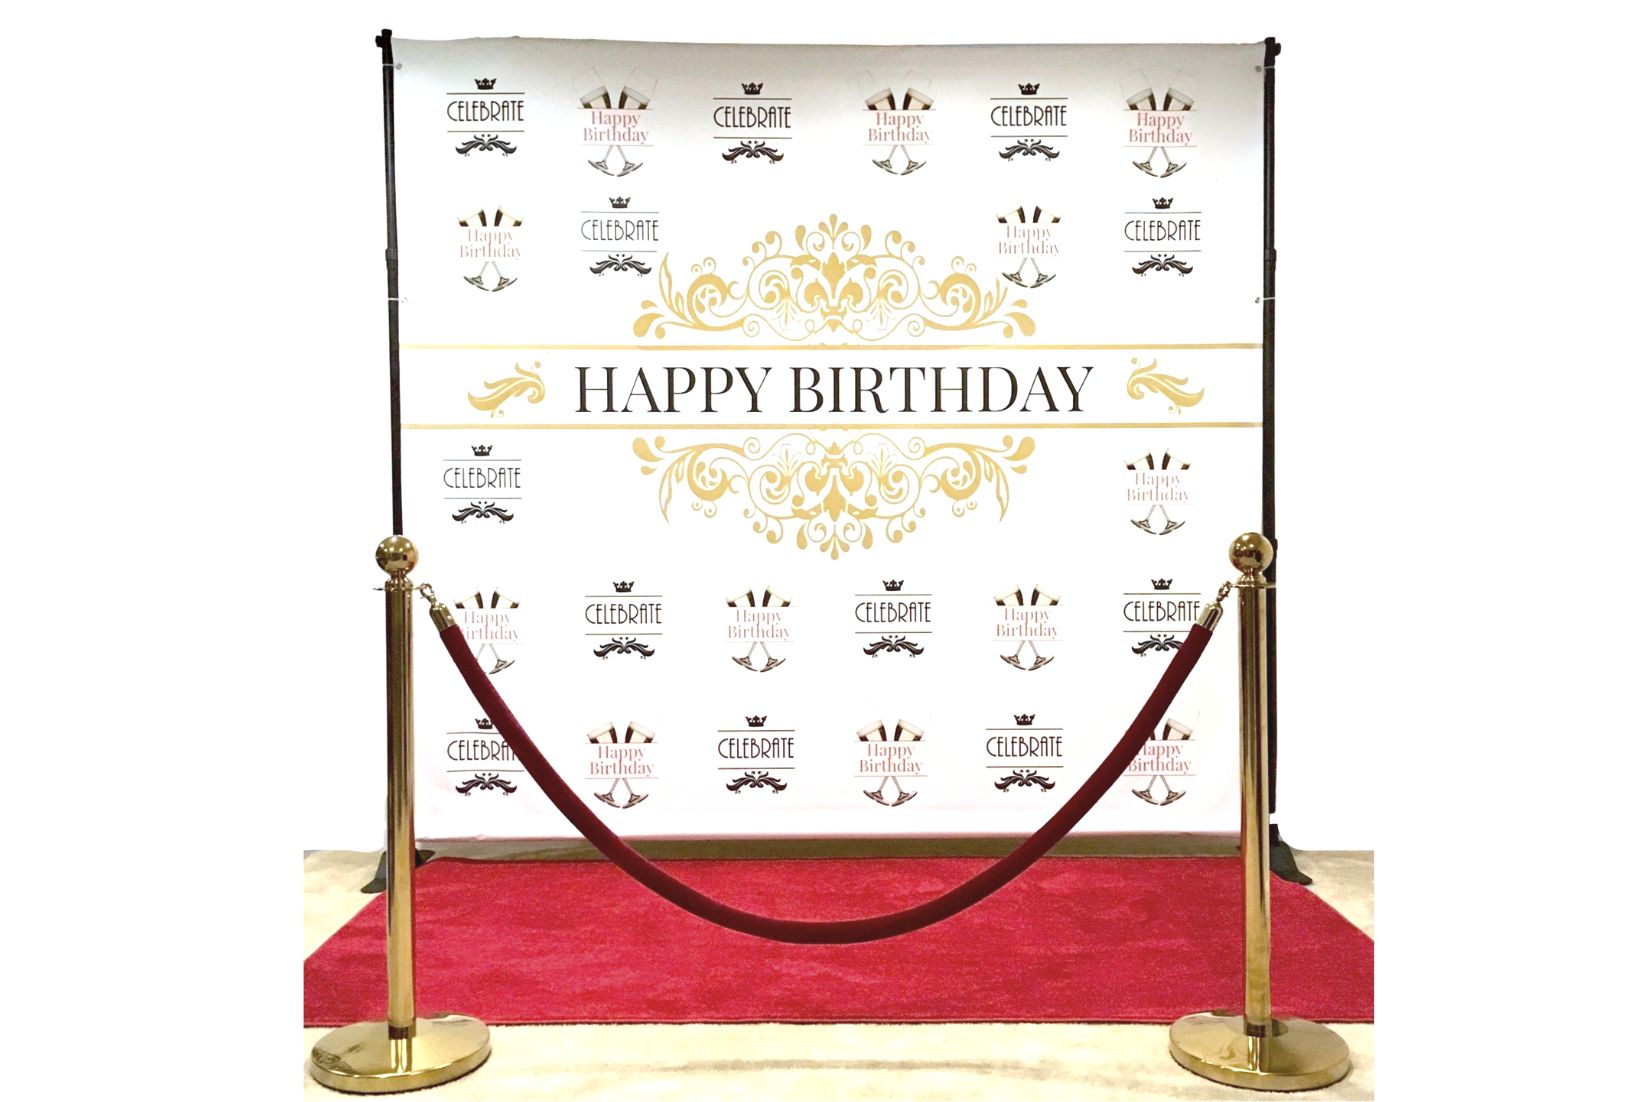 Happy birthday step and repeat banner. Rental set comes with banner, poles, red carpet, brass stanchions and velvet rope.